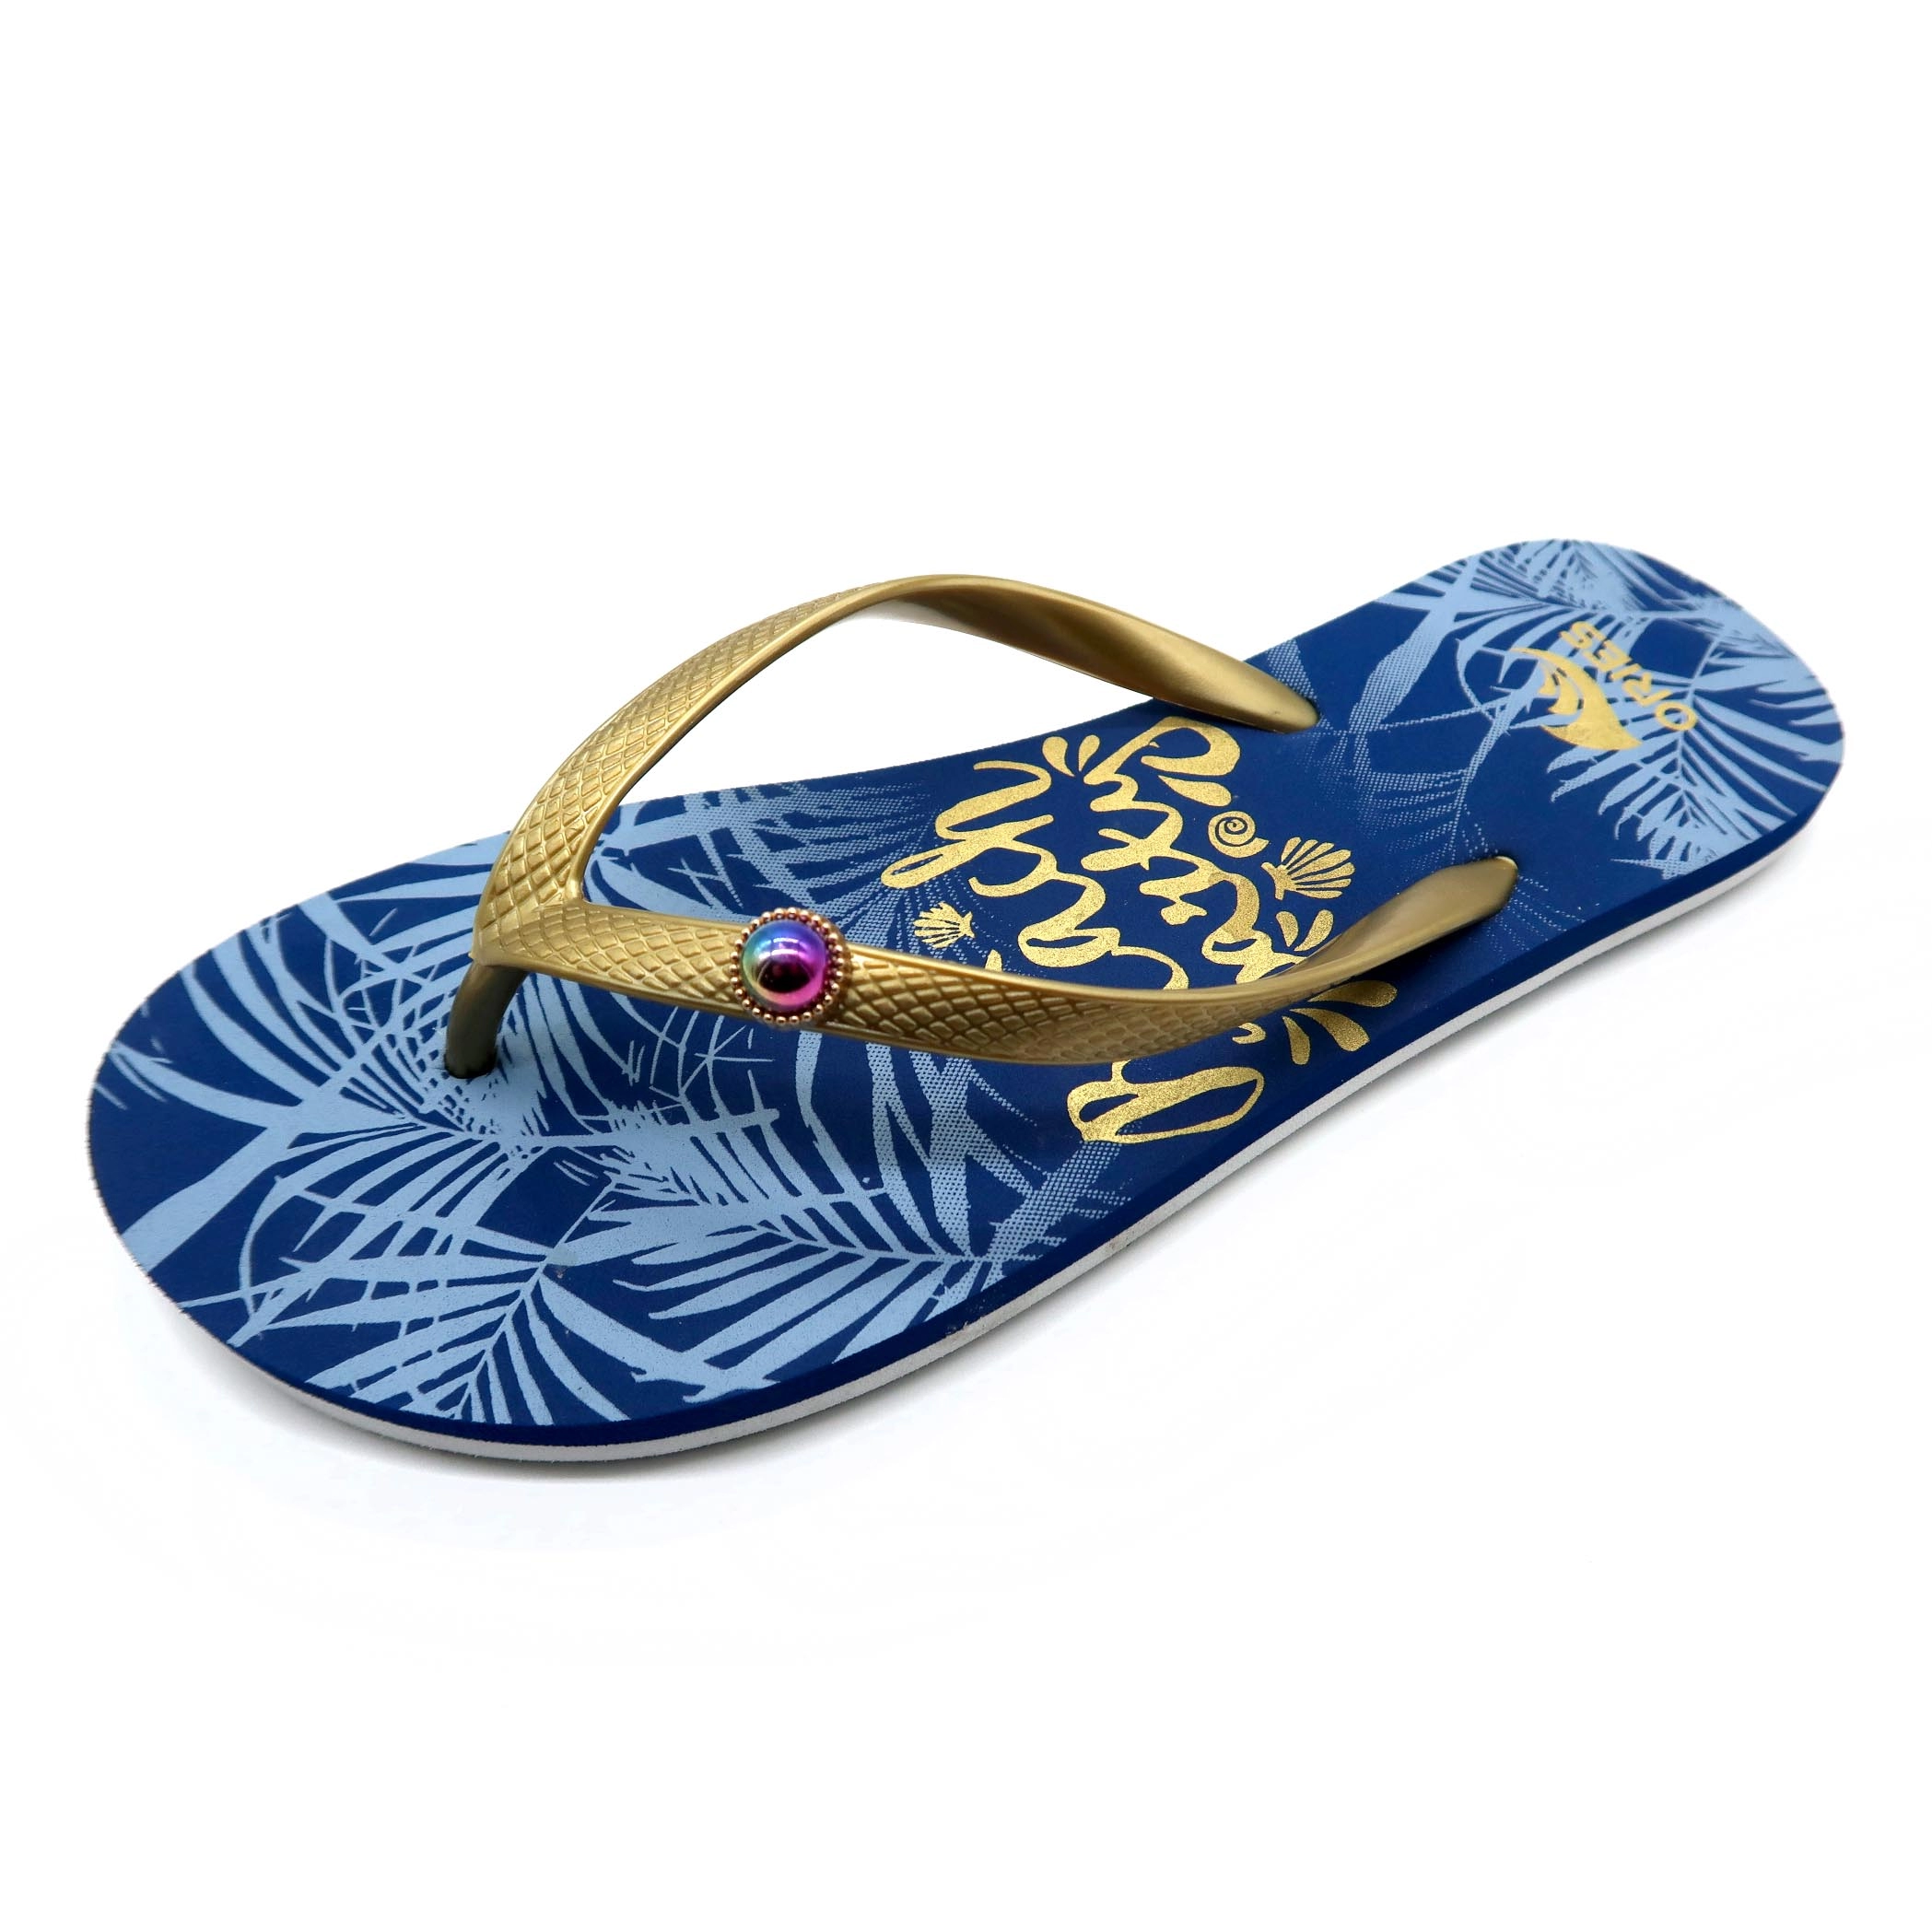 Shinny effect on strap with jewel daily wearing lady flip flops slippers